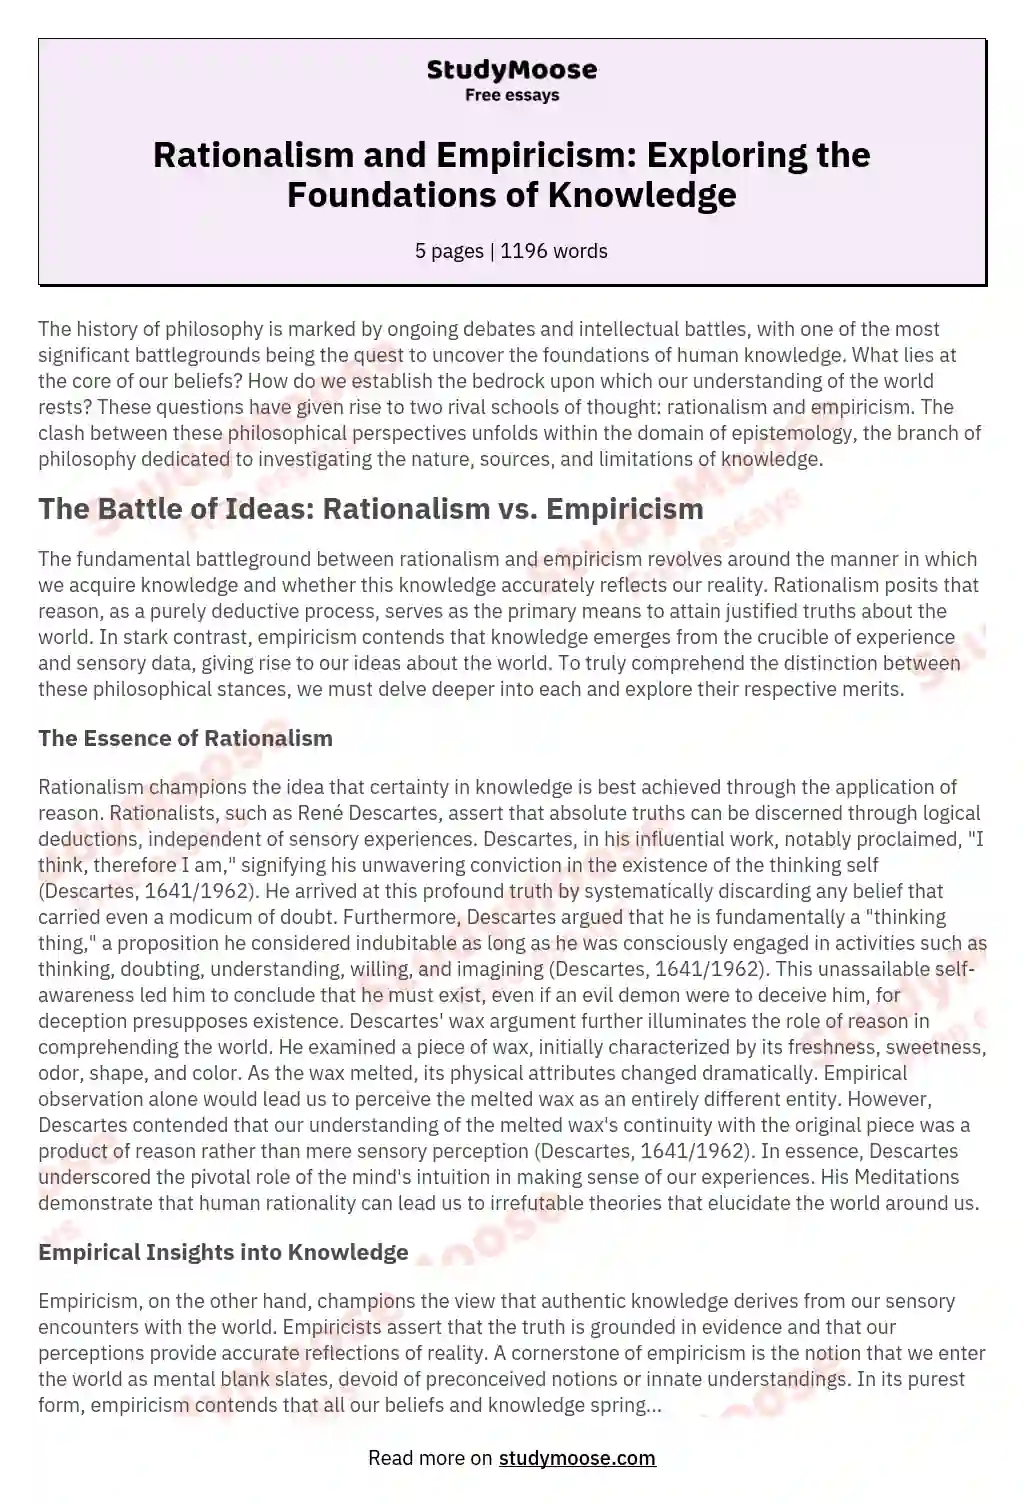 Rationalism and Empiricism: Exploring the Foundations of Knowledge essay